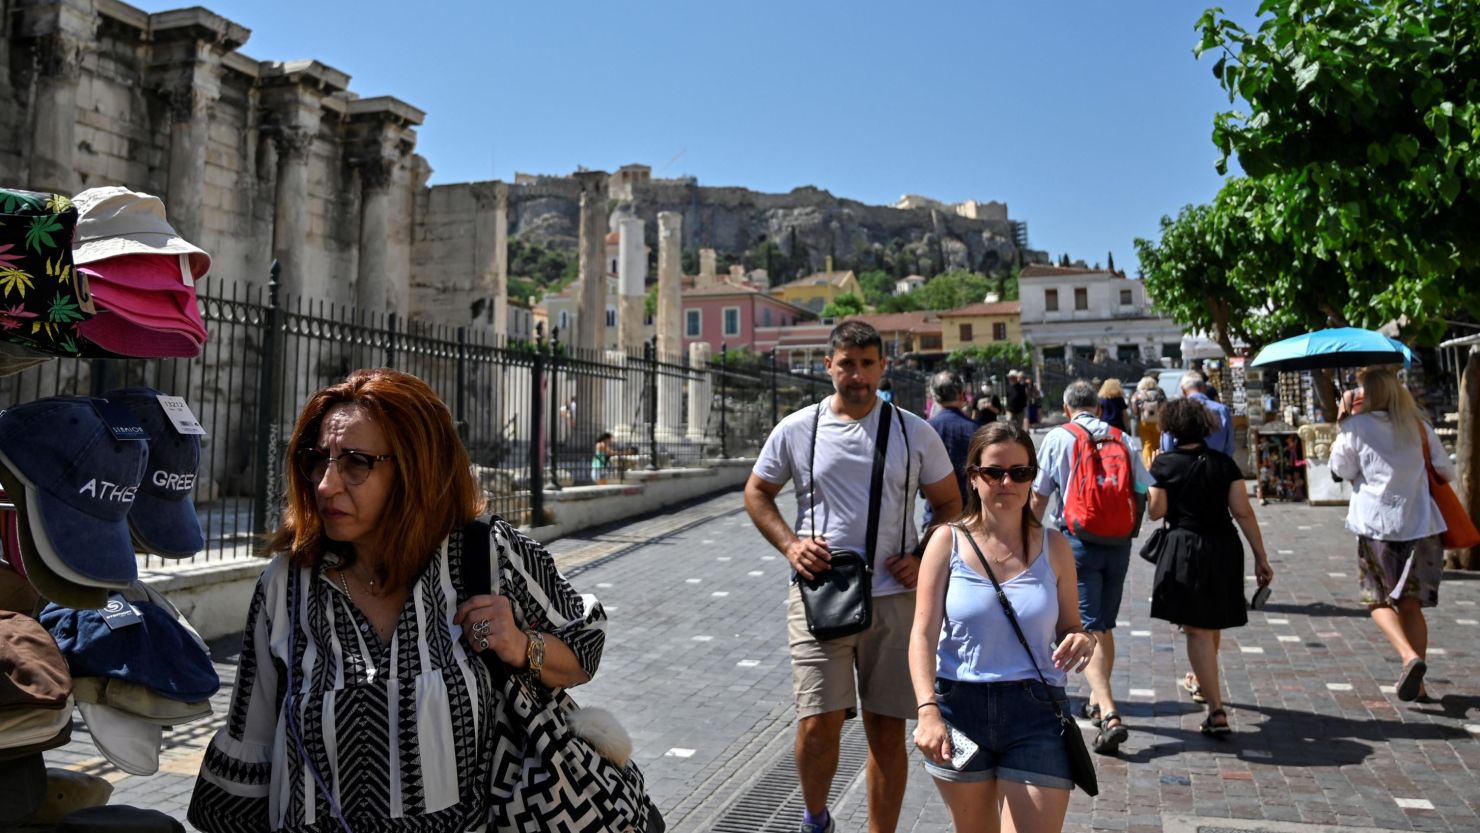 Tourists and locals  walk in a touristic area of Athens on June 1, 2022. - Greece dropped most mask mandates linked to Covid-19 restrictions starting June 1 to mid-September, a period coinciding with the height of its vital tourism season. (Photo by Louisa GOULIAMAKI / AFP) (Photo by LOUISA GOULIAMAKI/AFP via Getty Images)